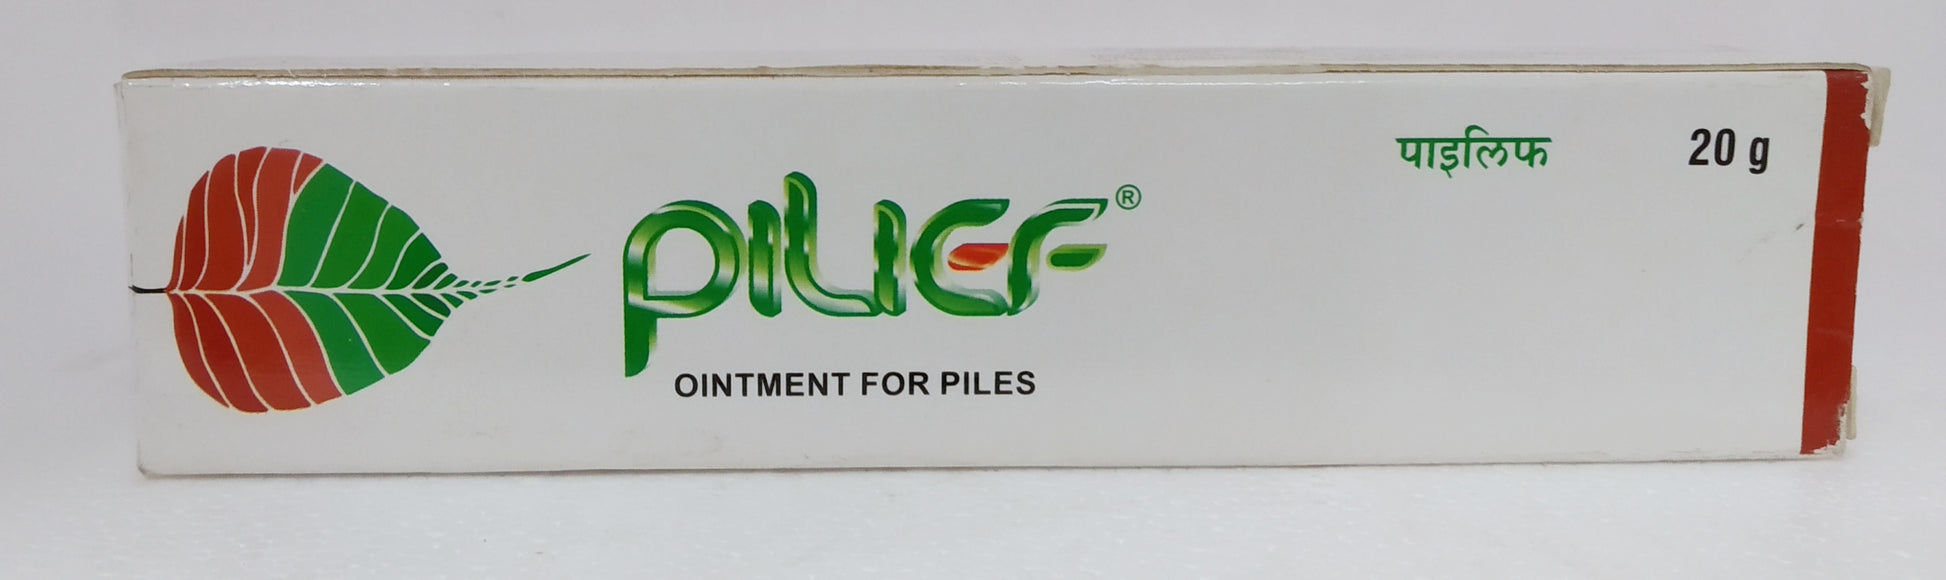 Shop Charak Pilief Ointment 20gm at price 78.00 from Charak Online - Ayush Care